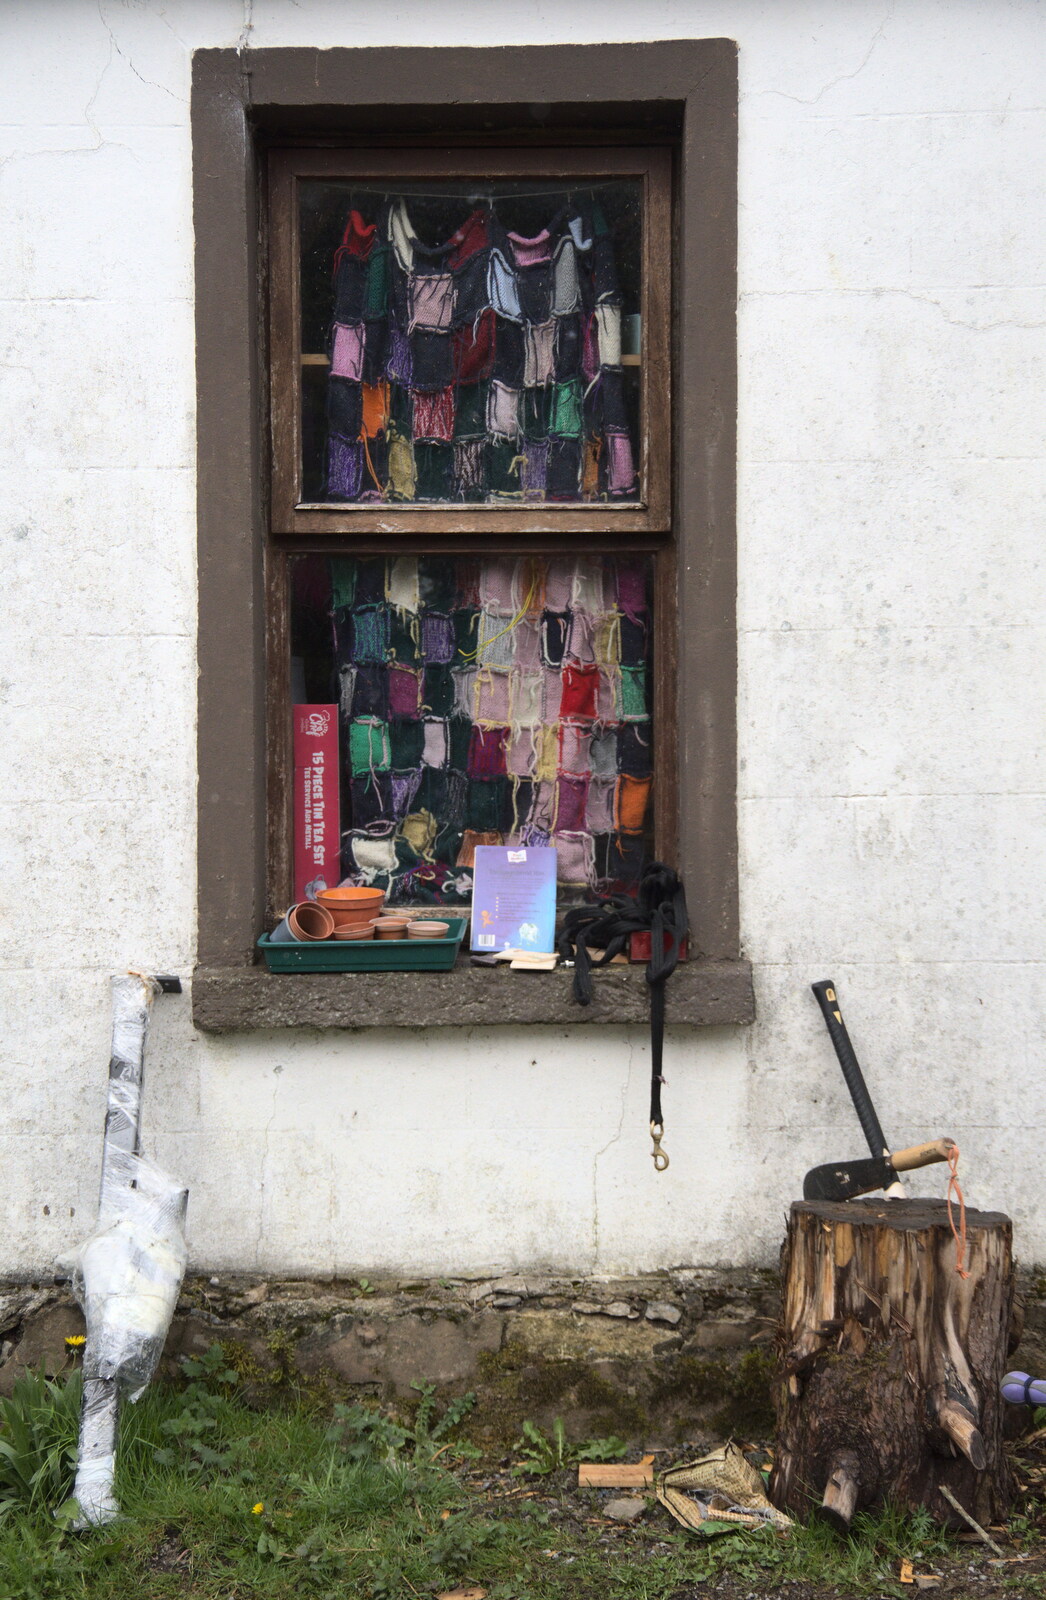 A crochet blanket hangs in a window from Manorhamilton and Bundoran, Leitrim and Donegal, Ireland - 16th April 2022